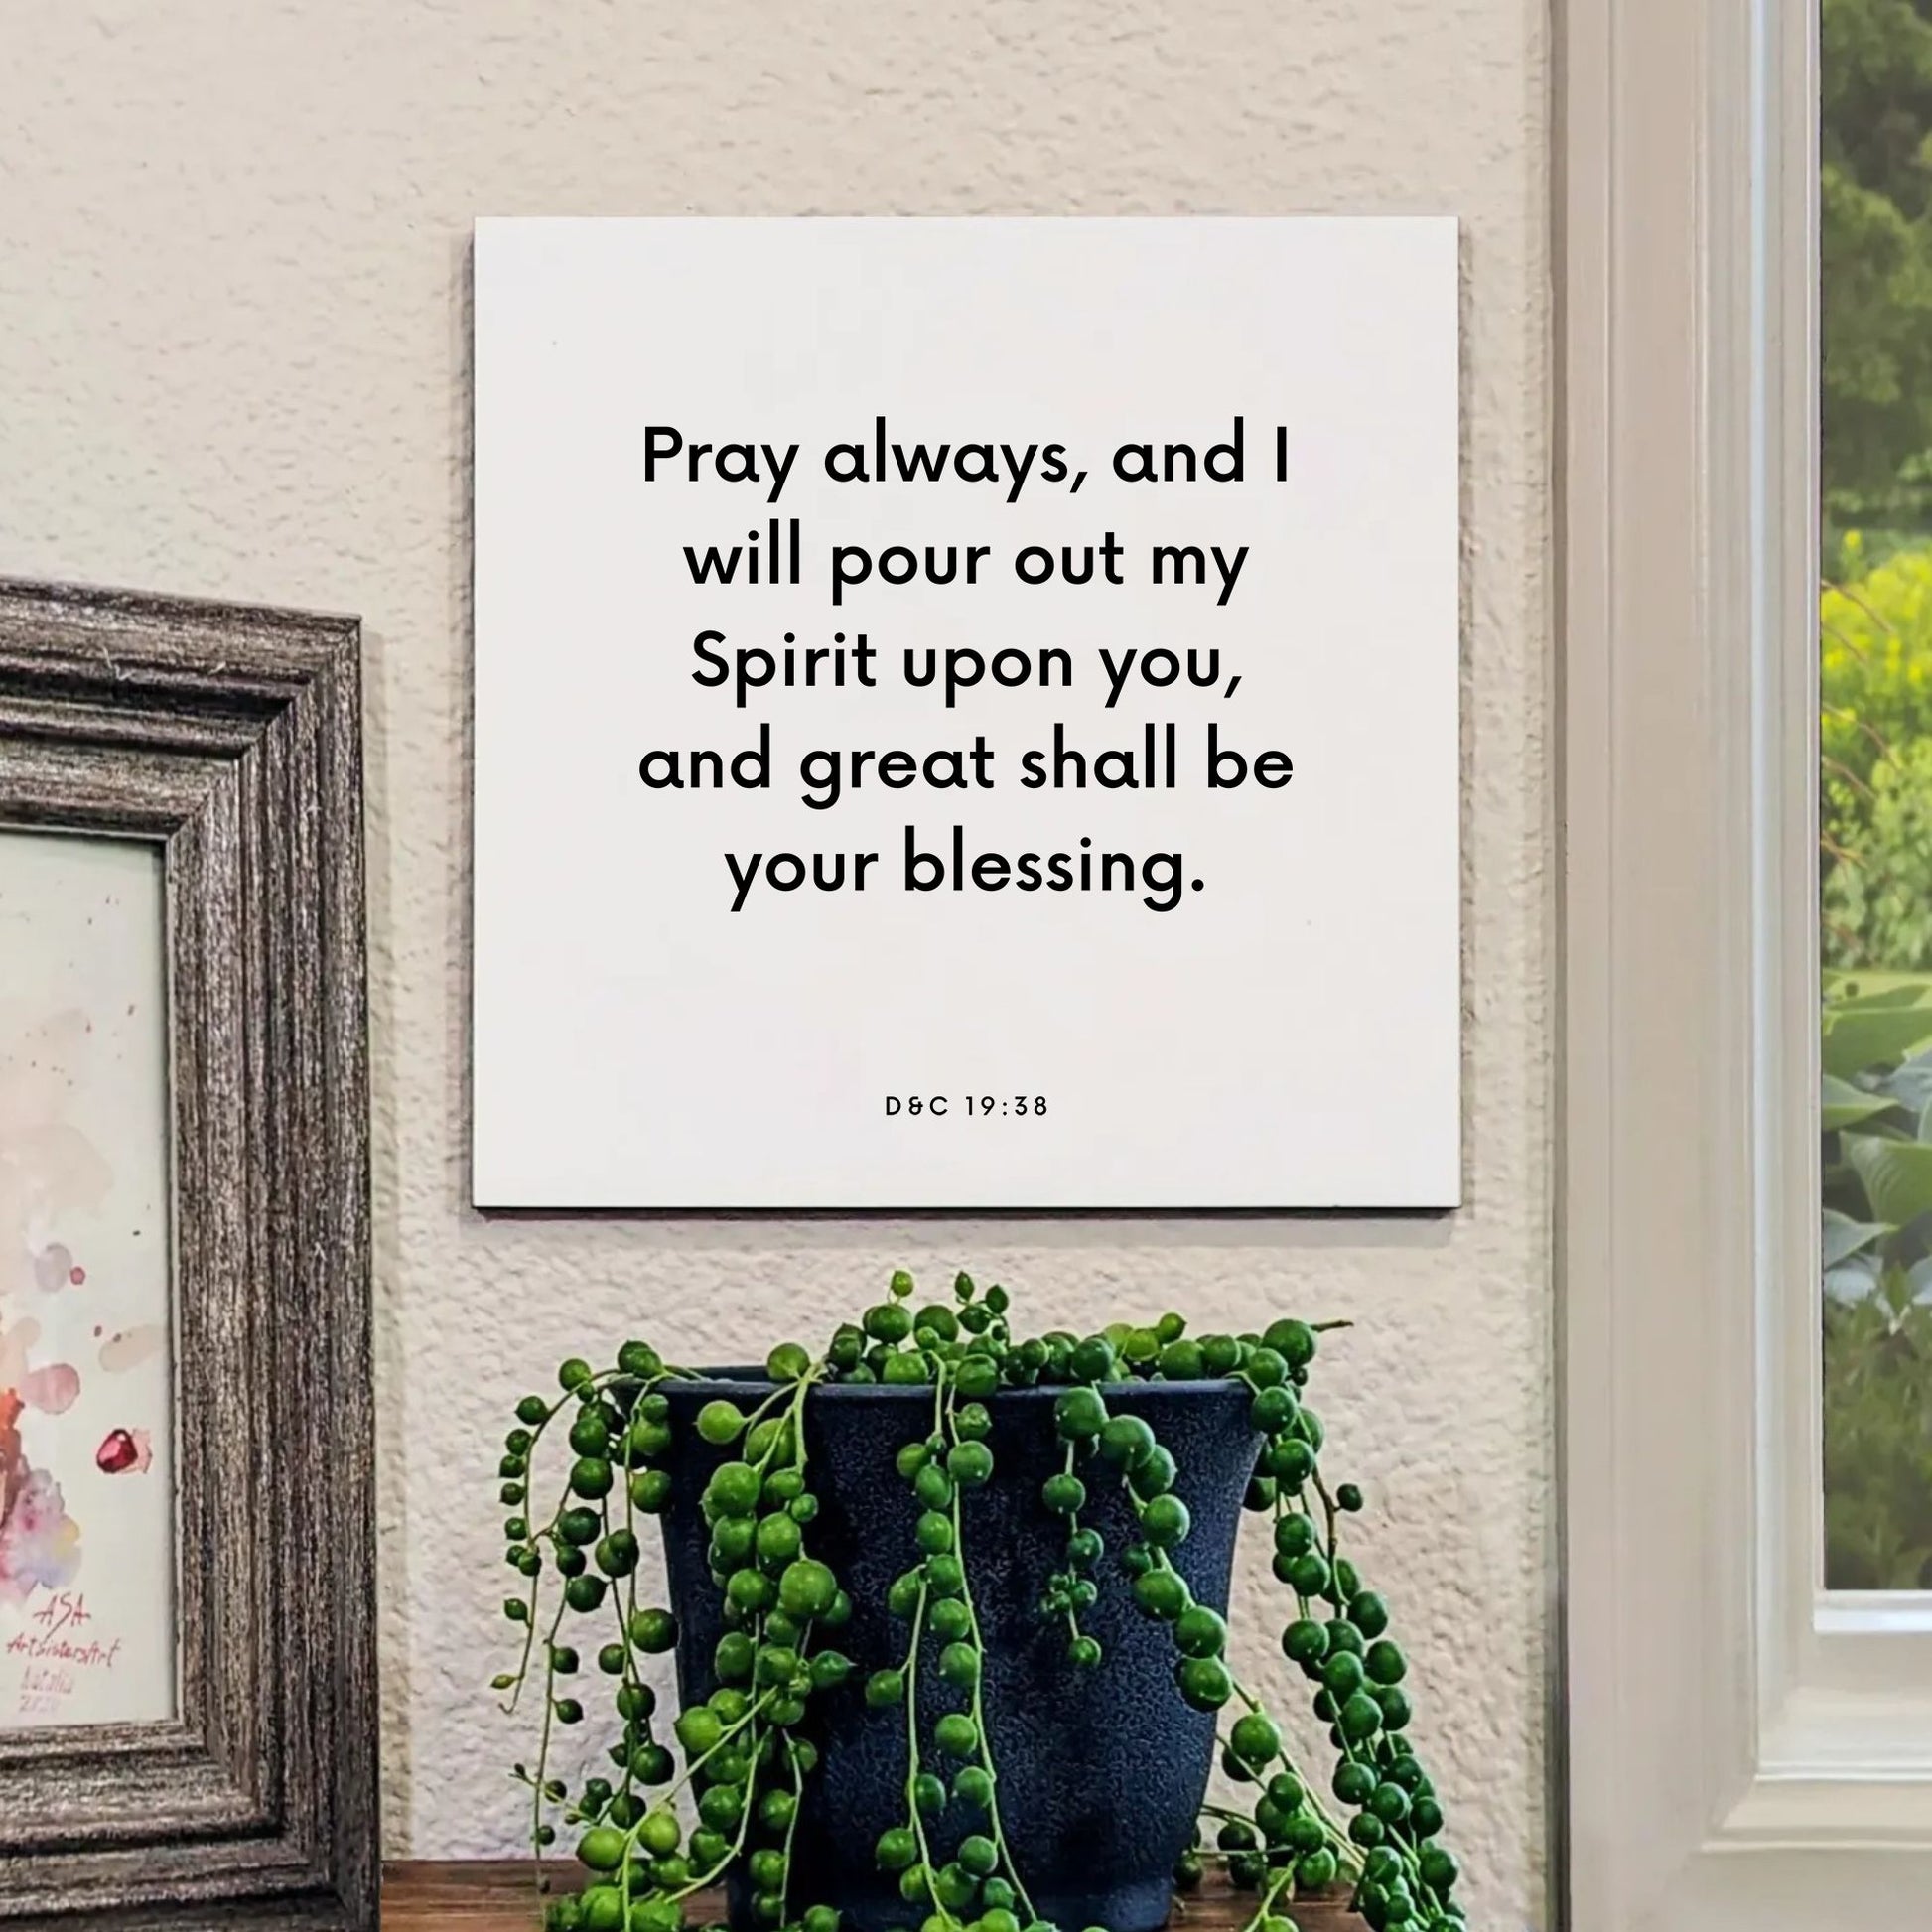 Window mouting of the scripture tile for D&C 19:38 - "Pray always, and I will pour out my Spirit upon you"